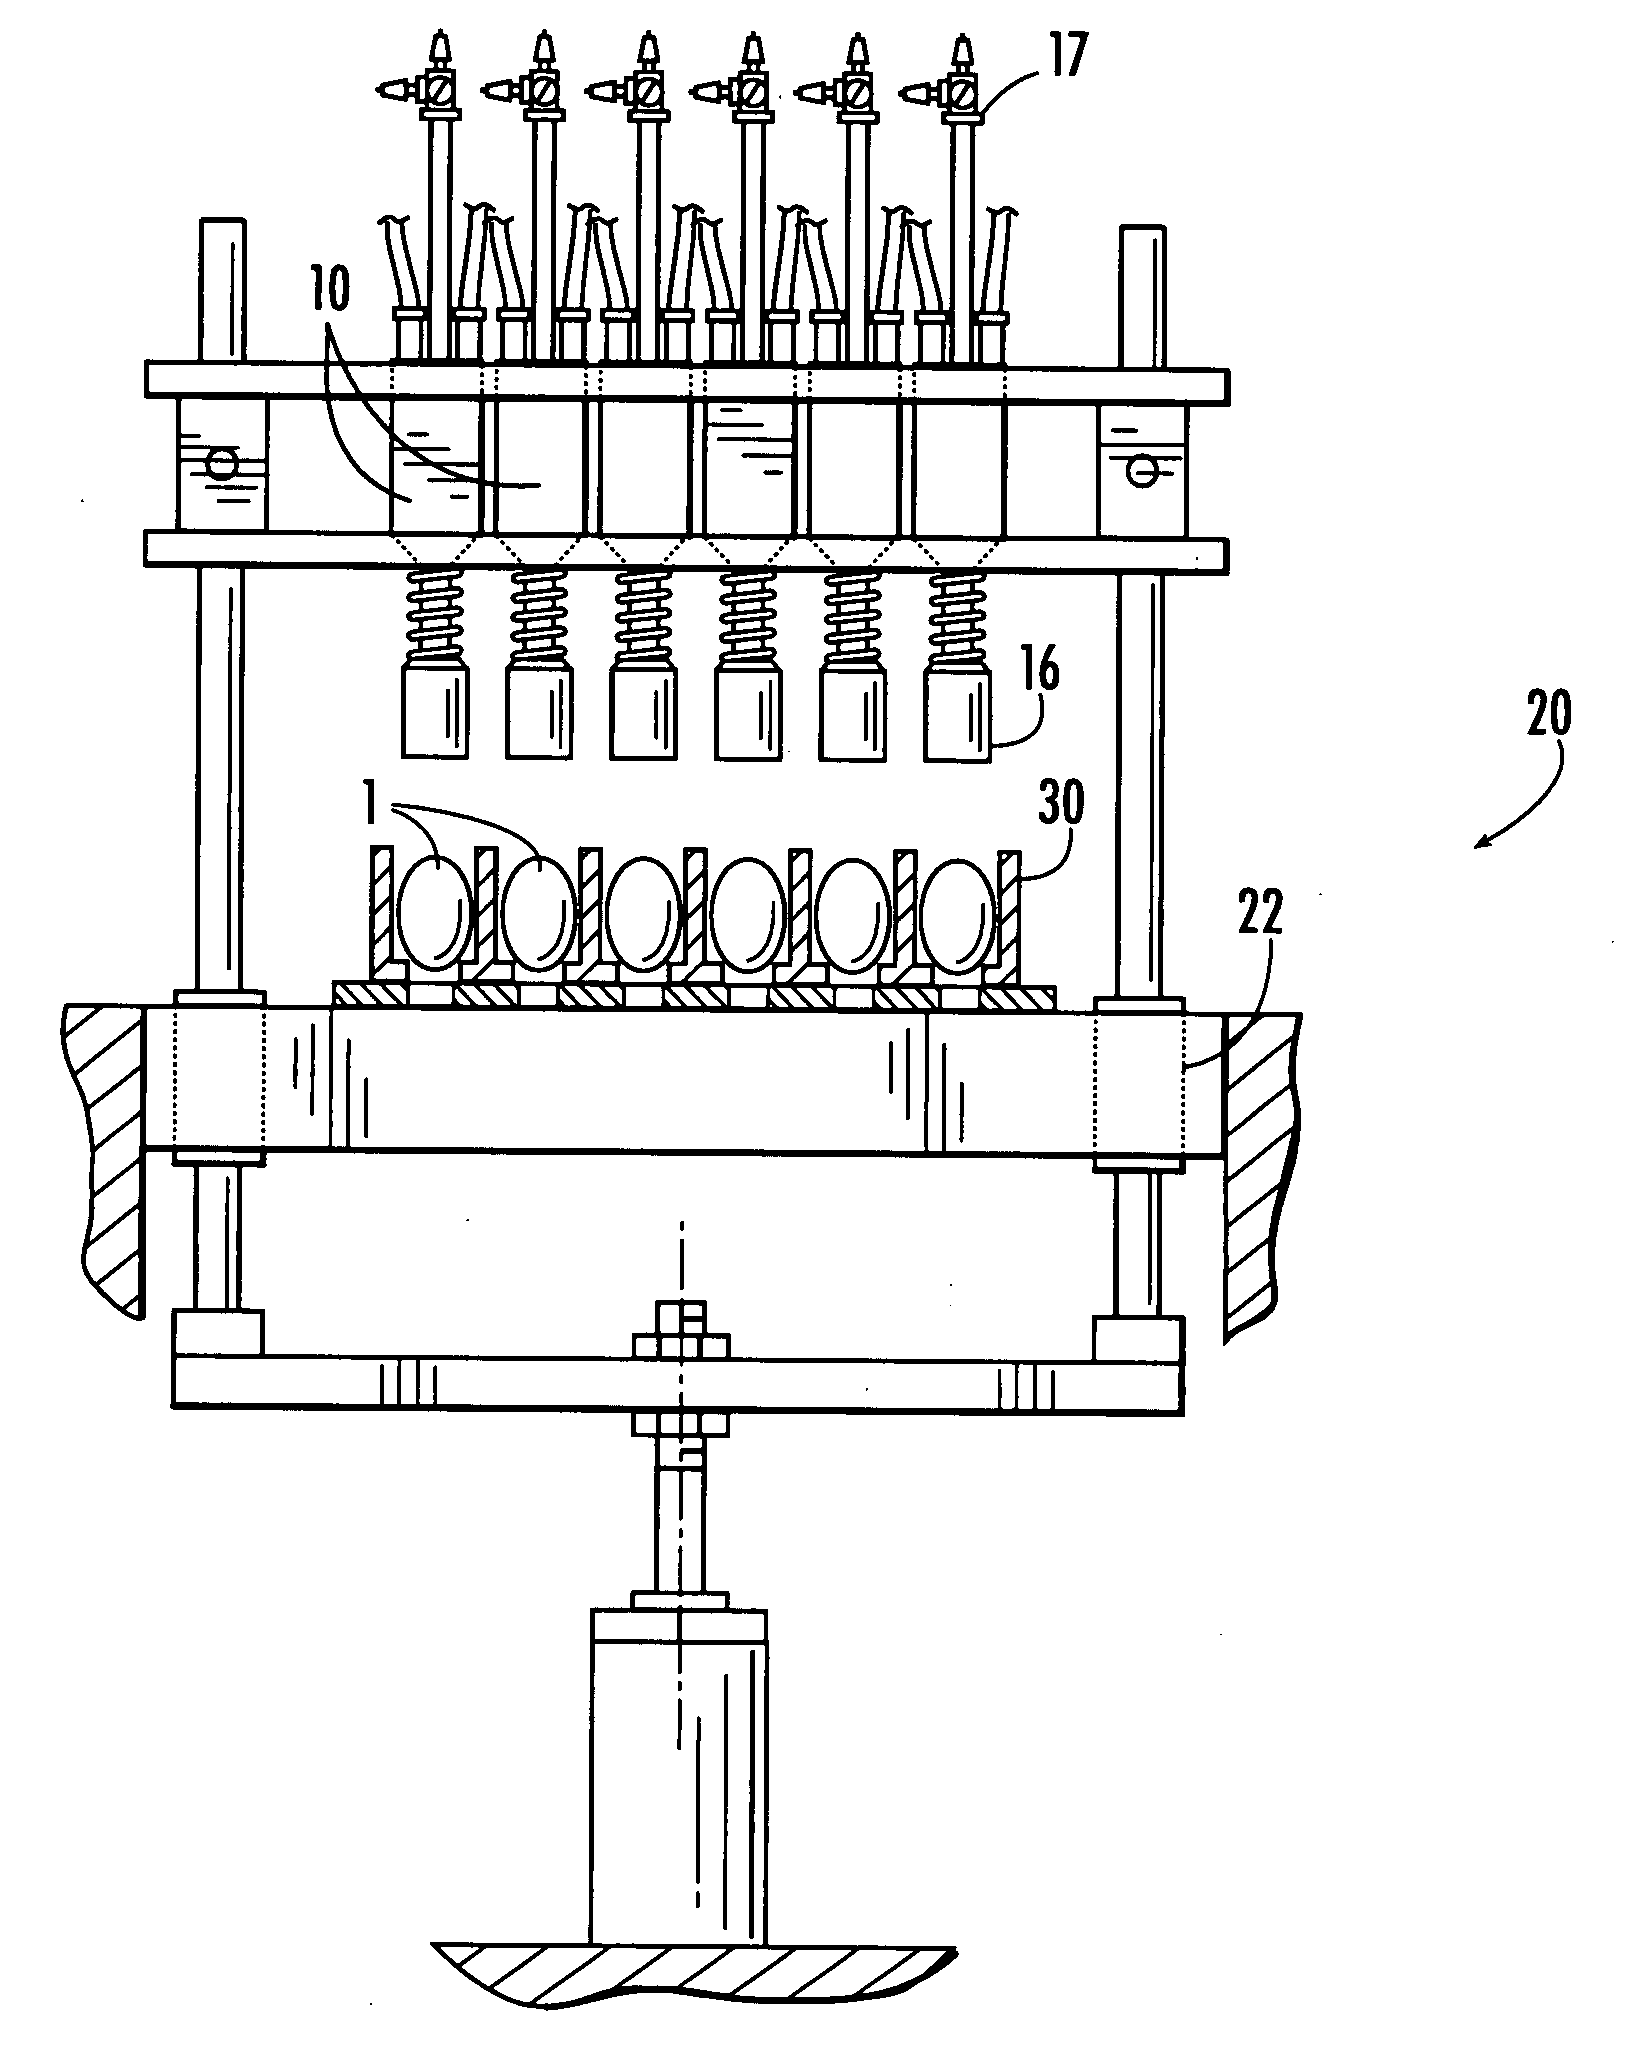 Methods and apparatus for delivering multiple substances in ovo